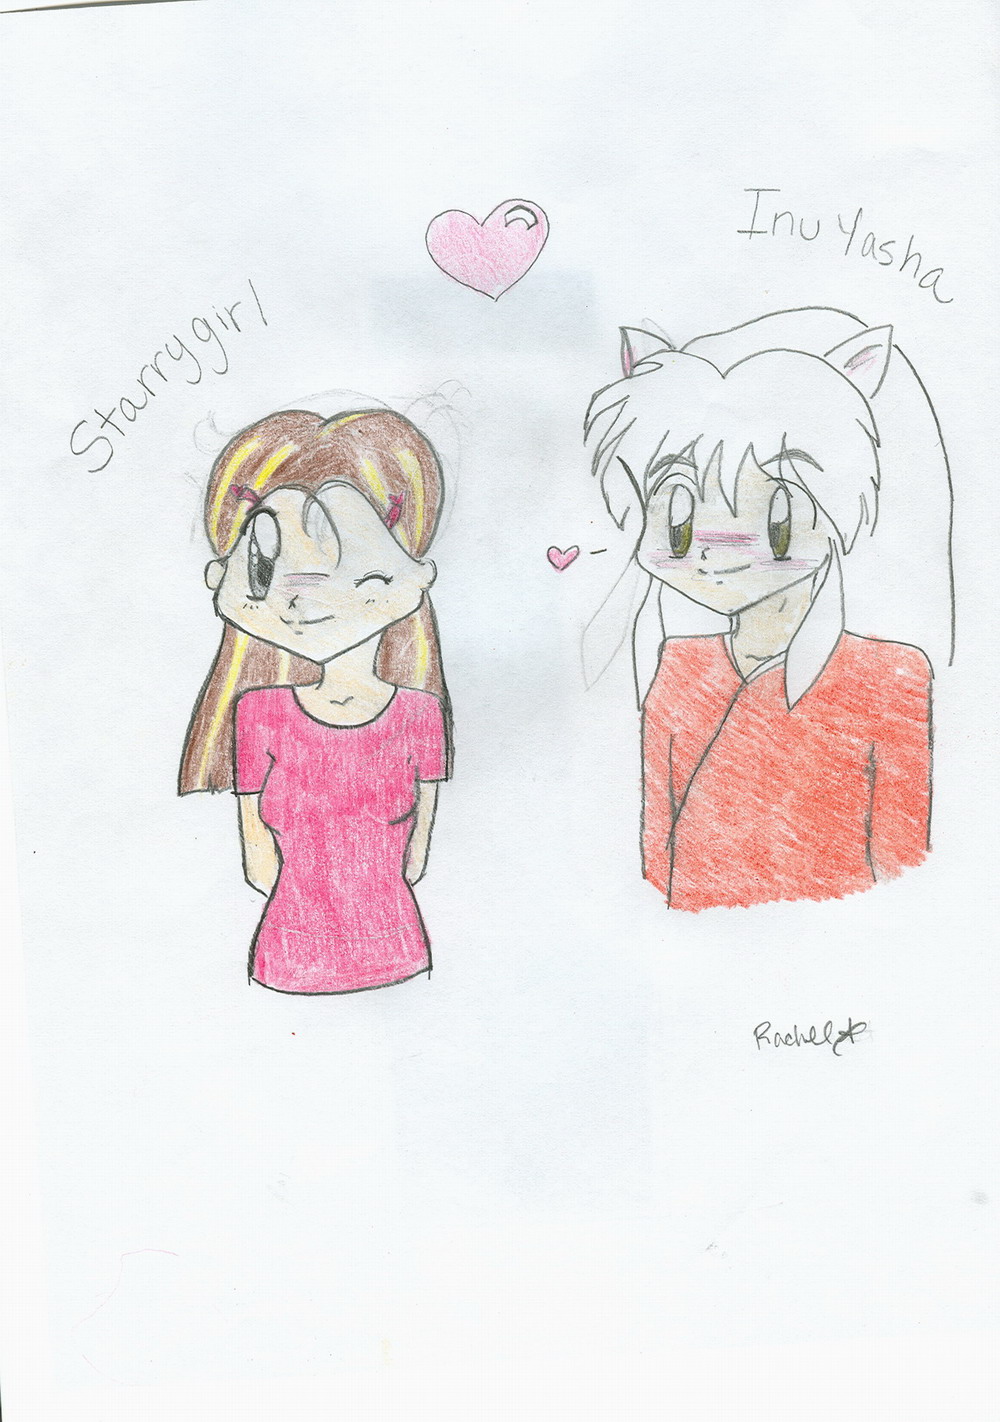 starrygirl and inuyasha by Tifa_Fan2004